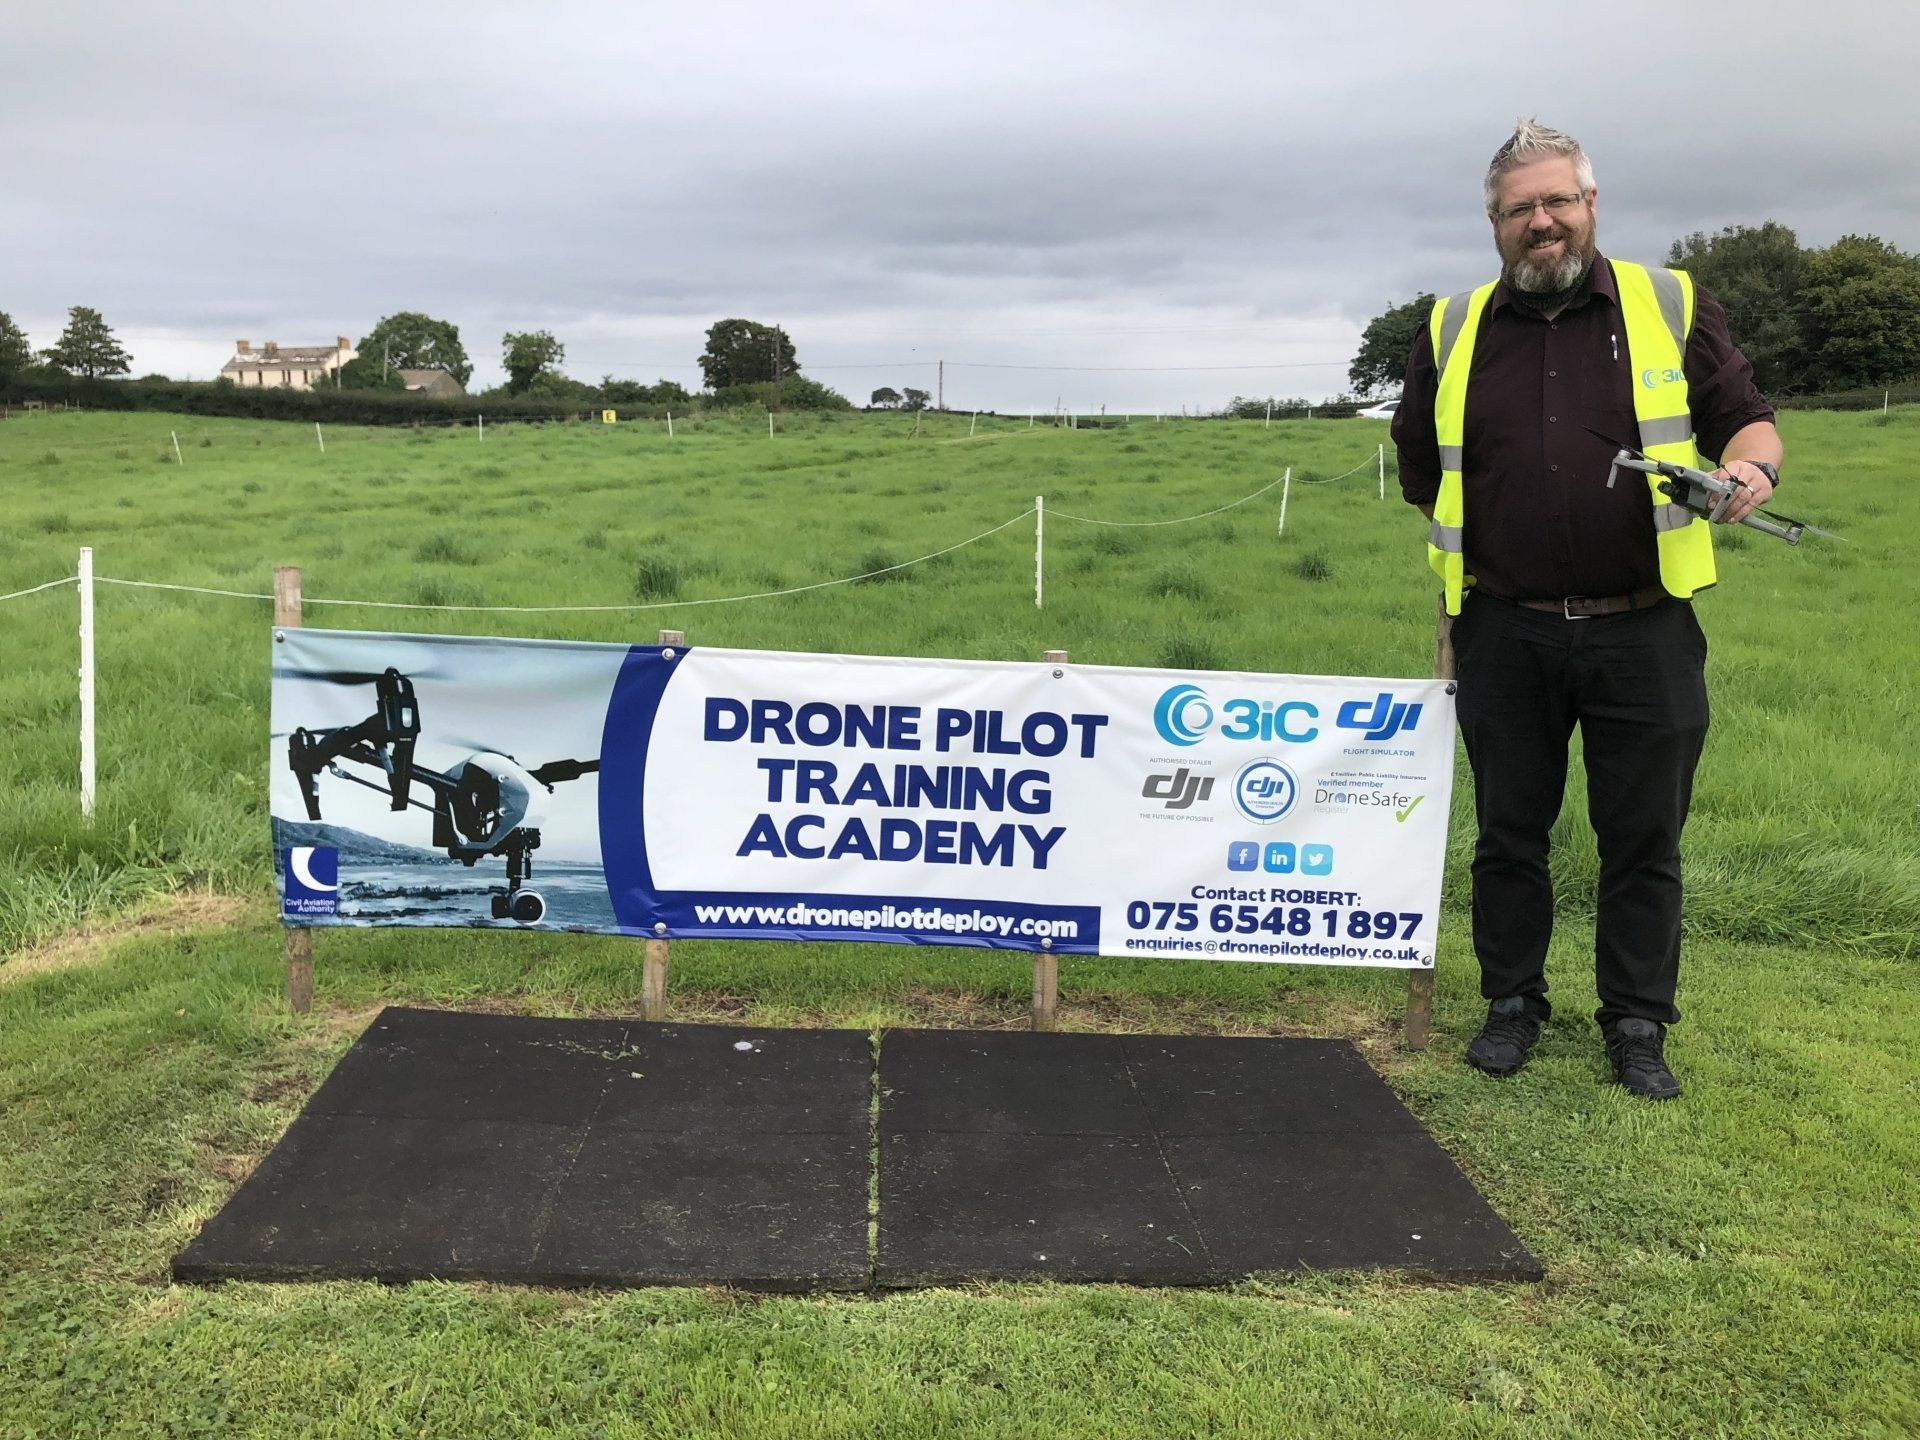 Drone Pilot Training Academy, Number 1 for Drone Pilot Training Academy in Northern Ireland, with Northern Ireland's Top Drone Pilot Instructor Robert Dobbin